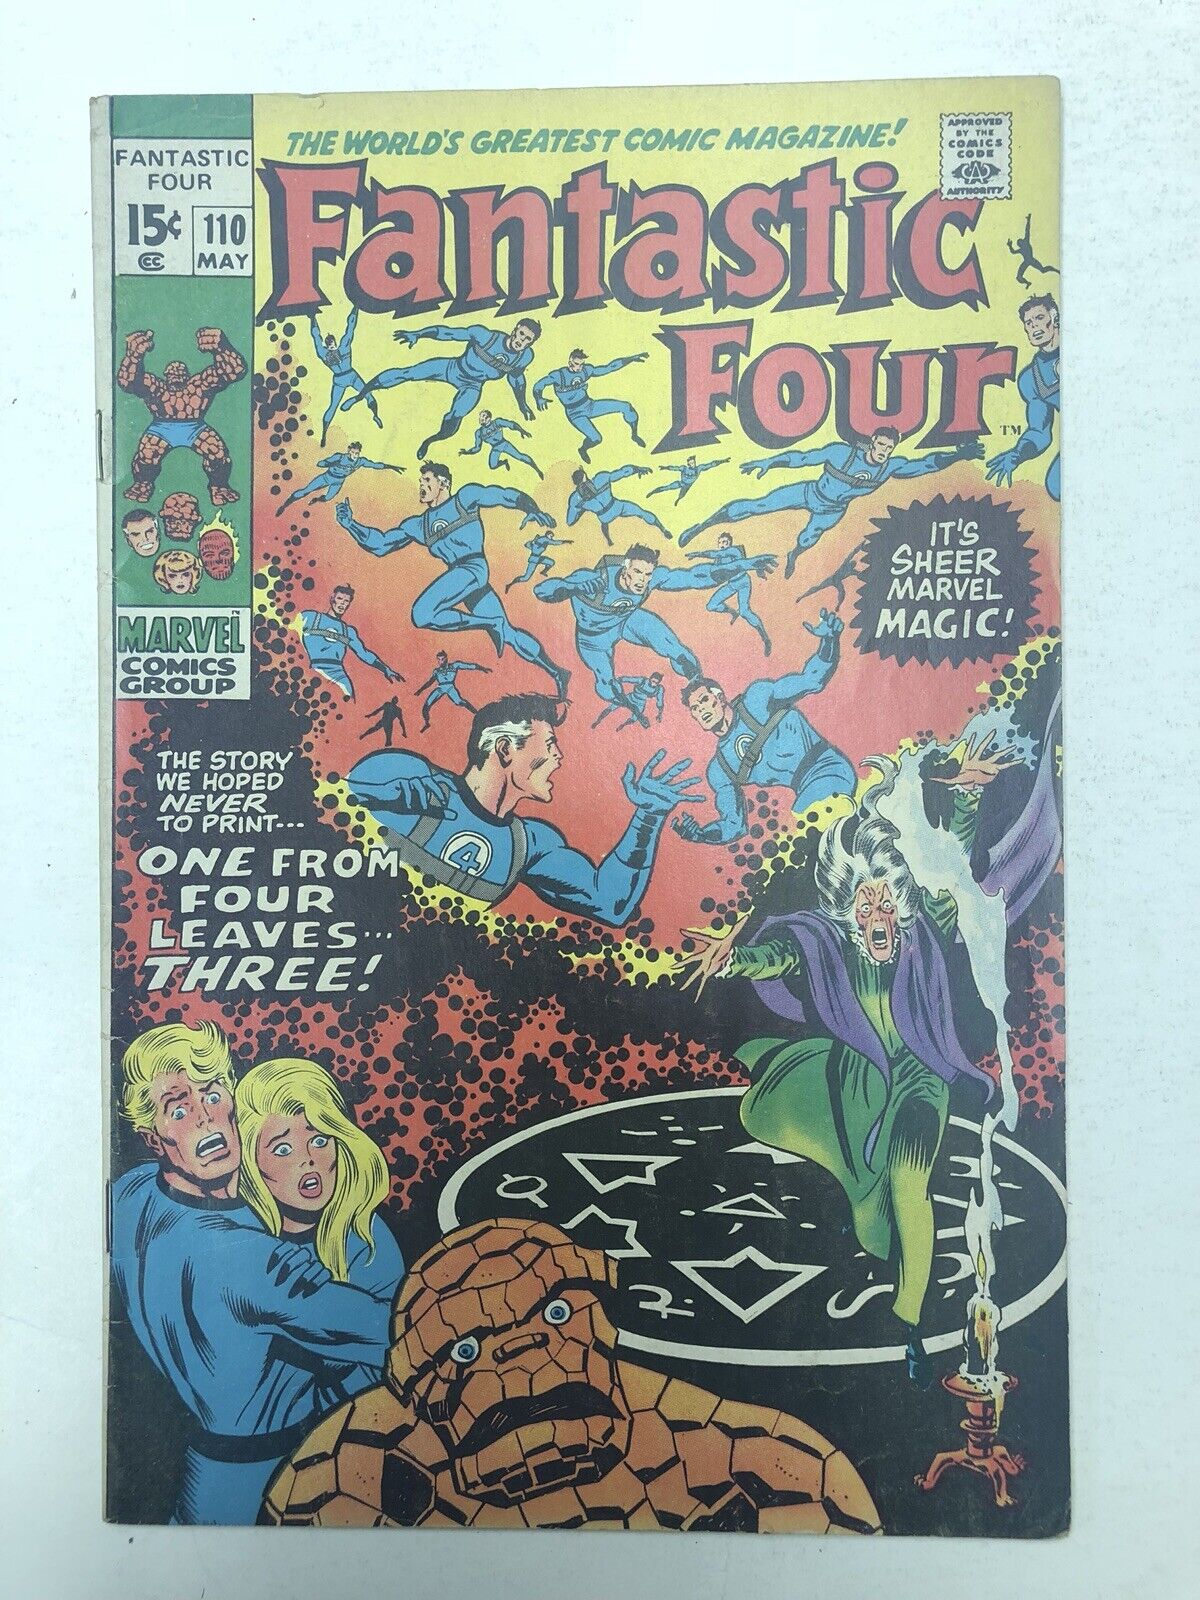 Fantastic Four #110 FN+ 1st Cover App of Agatha Harkness 1971 Marvel Comics